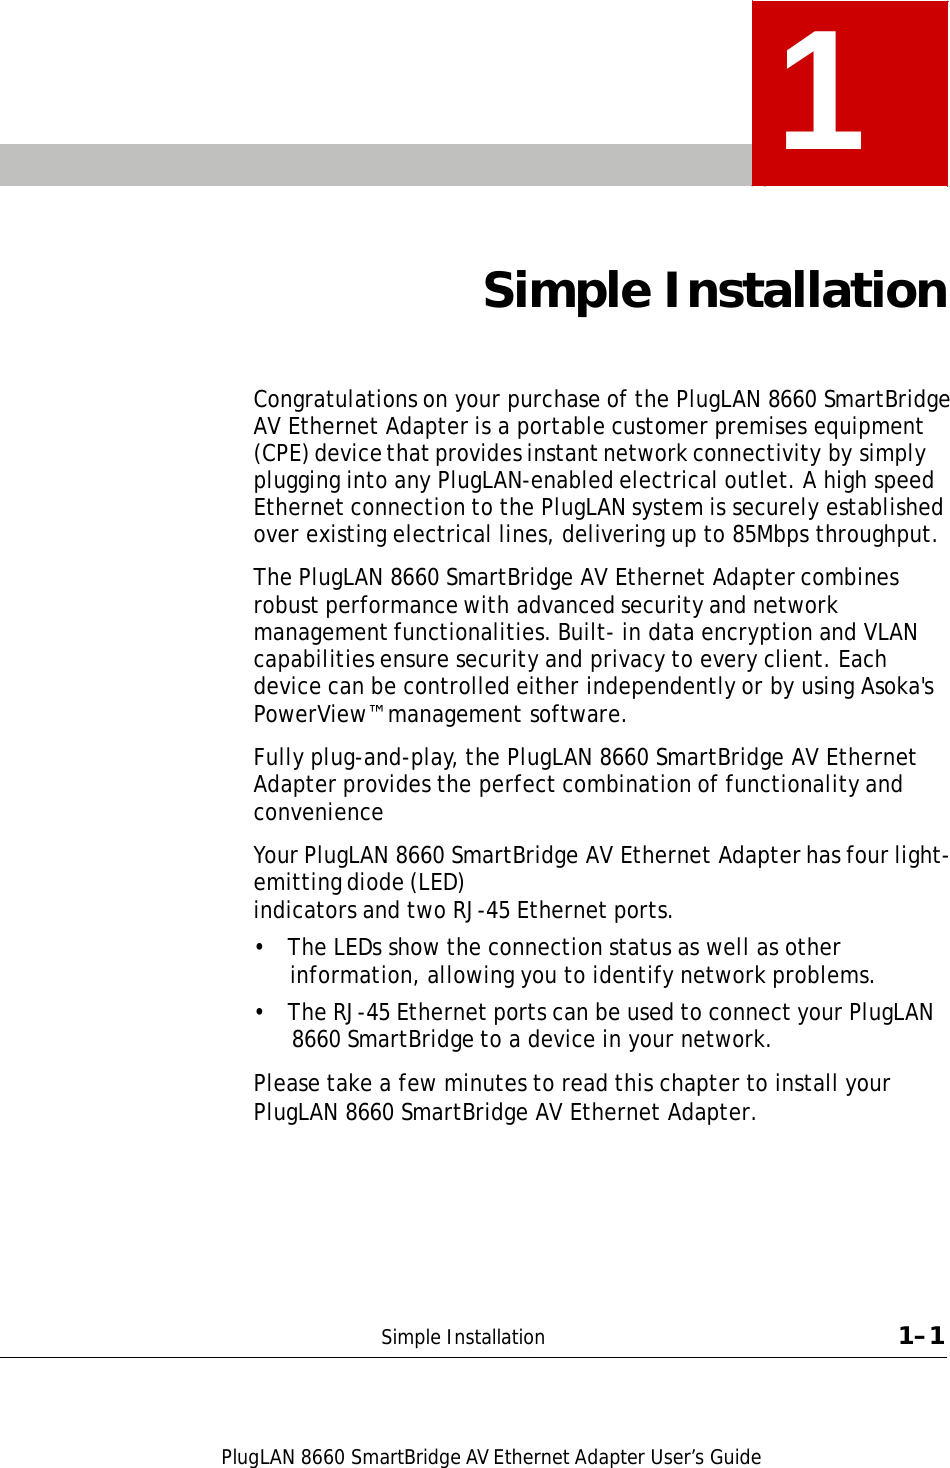 PlugLAN 8660 SmartBridge AV Ethernet Adapter User’s Guide  1    Simple Installation    Congratulations on your purchase of the PlugLAN 8660 SmartBridge AV Ethernet Adapter is a portable customer premises equipment (CPE) device that provides instant network connectivity by simply plugging into any PlugLAN-enabled electrical outlet. A high speed Ethernet connection to the PlugLAN system is securely established over existing electrical lines, delivering up to 85Mbps throughput.  The PlugLAN 8660 SmartBridge AV Ethernet Adapter combines robust performance with advanced security and network management functionalities. Built- in data encryption and VLAN capabilities ensure security and privacy to every client. Each device can be controlled either independently or by using Asoka&apos;s PowerView™ management software.  Fully plug-and-play, the PlugLAN 8660 SmartBridge AV Ethernet Adapter provides the perfect combination of functionality and convenience  Your PlugLAN 8660 SmartBridge AV Ethernet Adapter has four light-emitting diode (LED) indicators and two RJ-45 Ethernet ports.  •  The LEDs show the connection status as well as other information, allowing you to identify network problems. •  The RJ-45 Ethernet ports can be used to connect your PlugLAN 8660 SmartBridge to a device in your network.  Please take a few minutes to read this chapter to install your PlugLAN 8660 SmartBridge AV Ethernet Adapter.           Simple Installation  1–1 